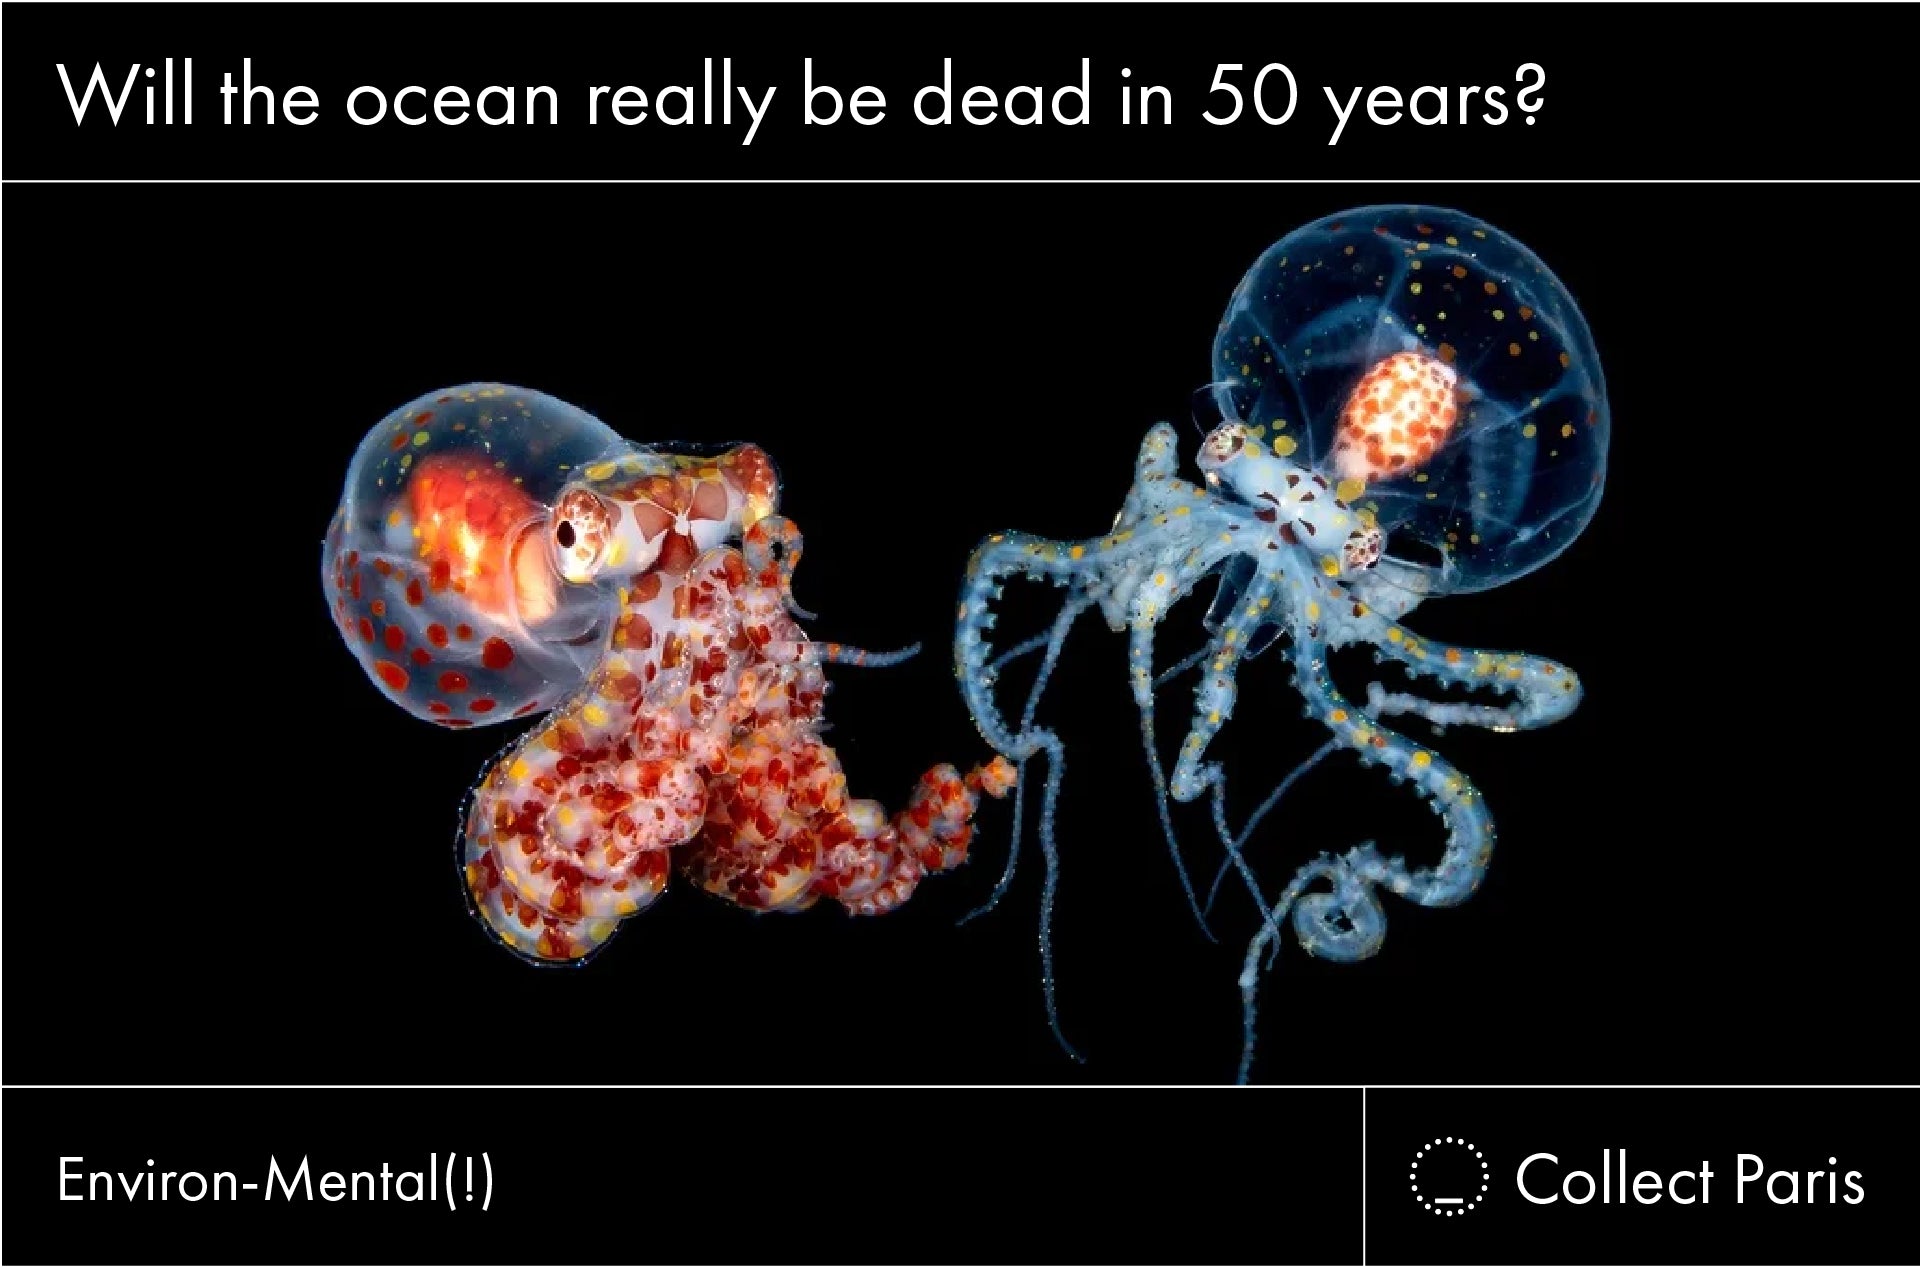 http://www.collectparis.com/cdn/shop/articles/Will_the_ocean_really_be_dead_in_50_years.jpg?v=1693384041